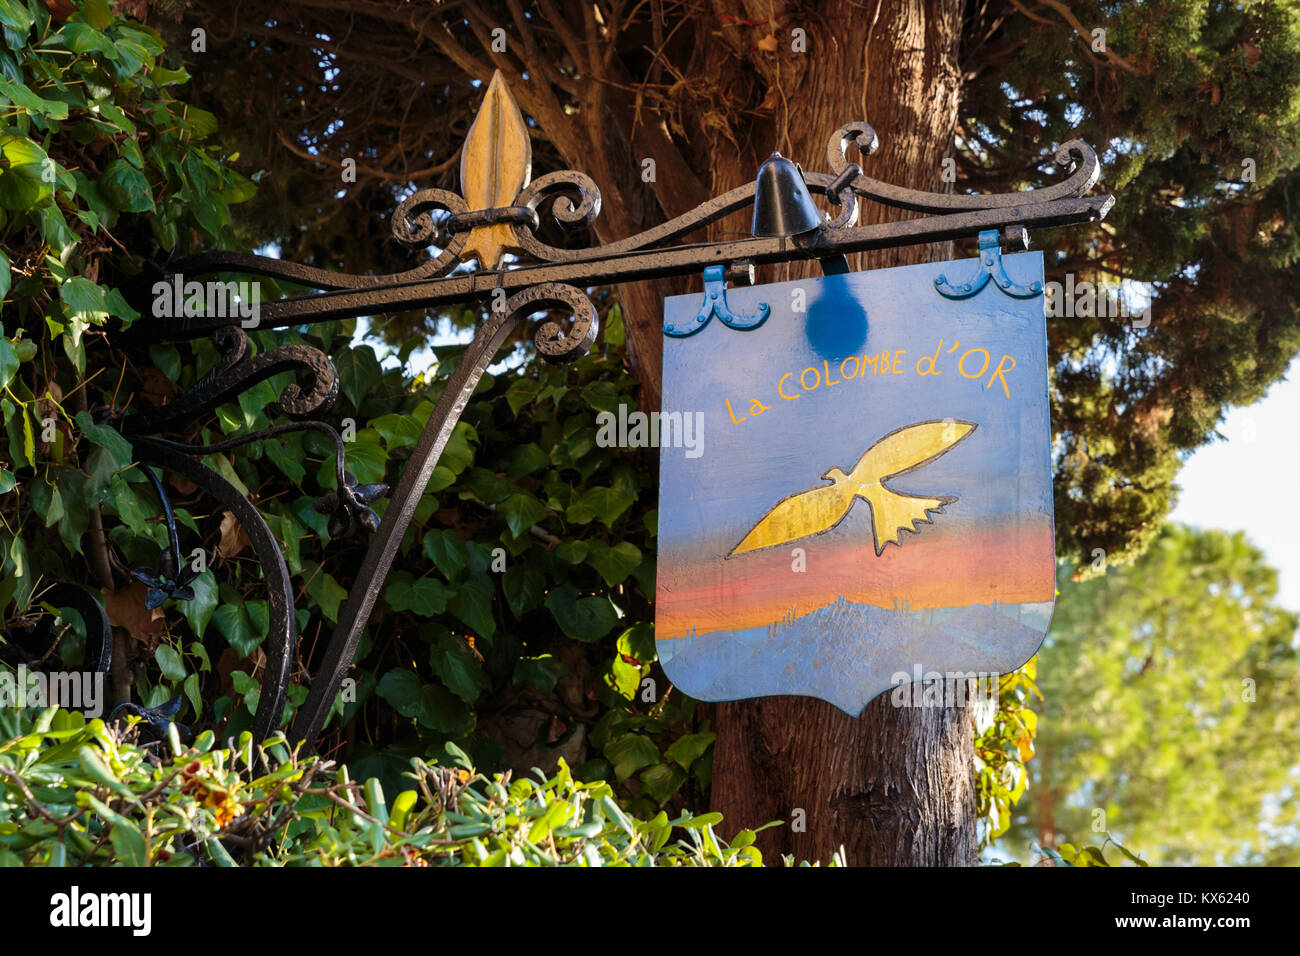 La Colombe d'Or restaurant and hotel sign in, Saint Paul de Vence, France Stock Photo